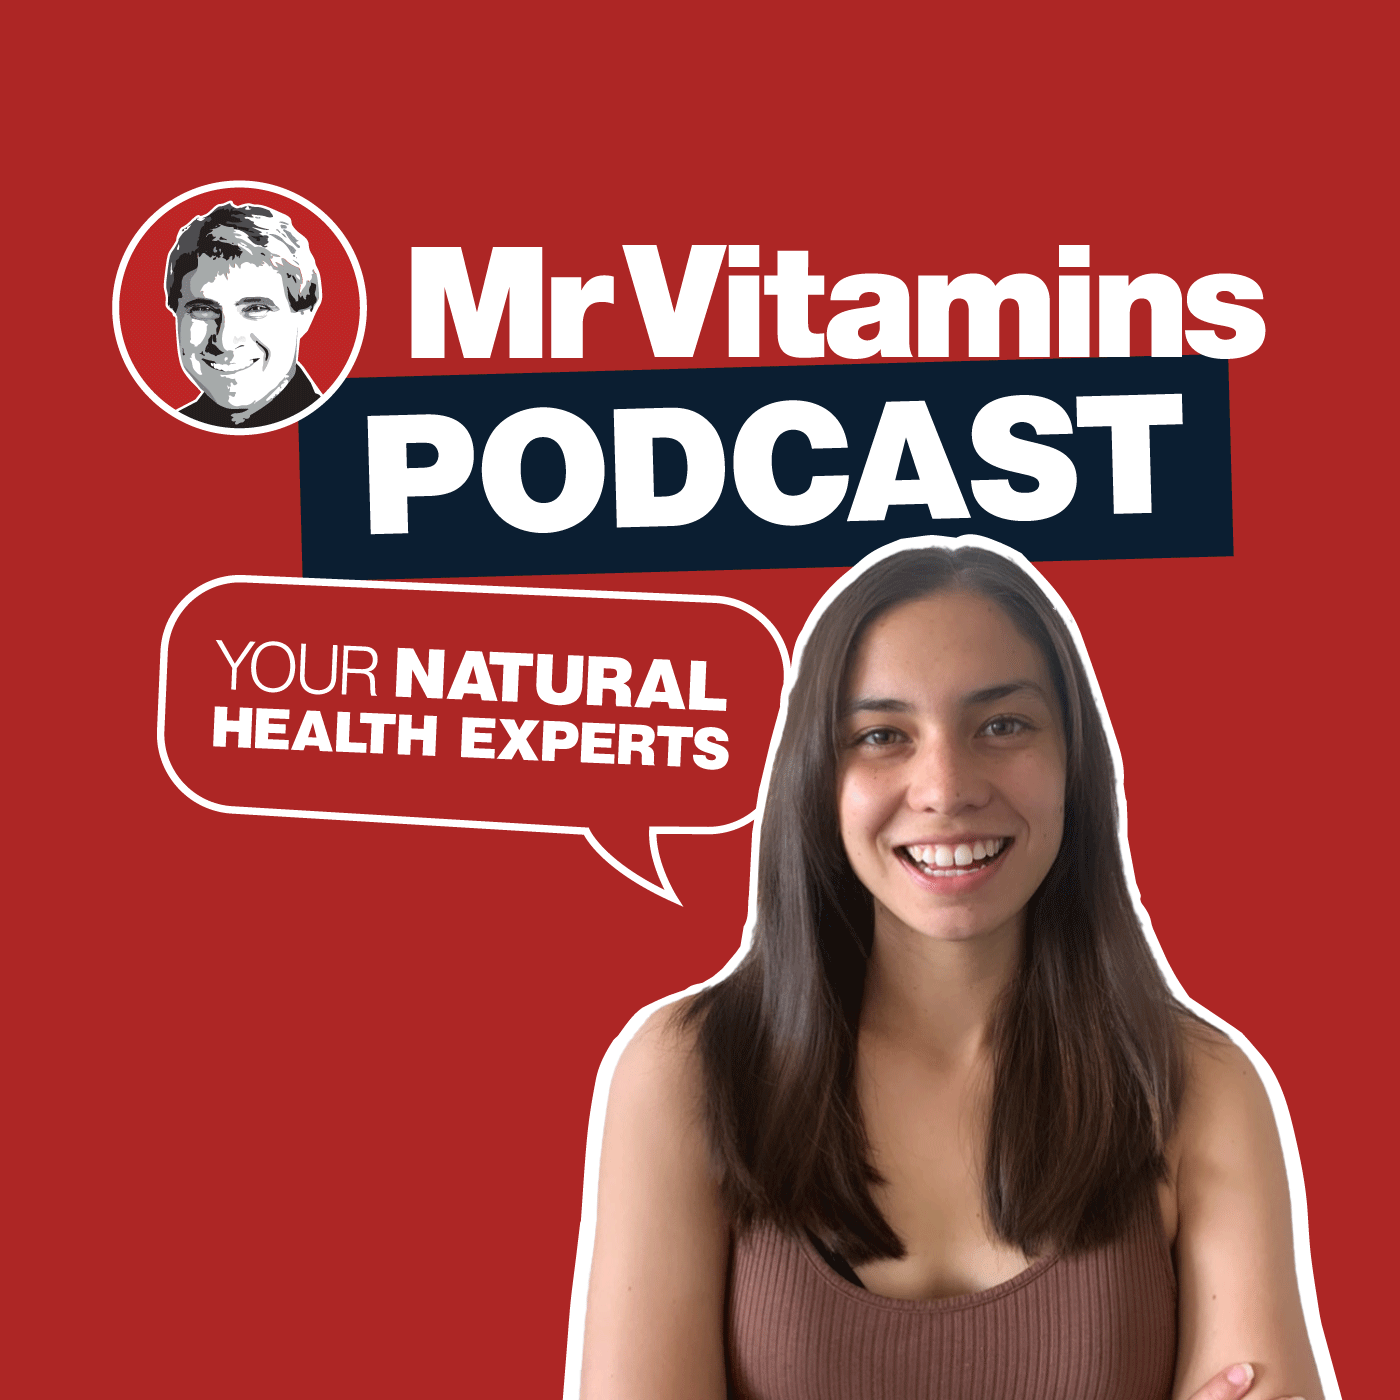 Mr Vitamins Podcast - Myth Busters and Facts